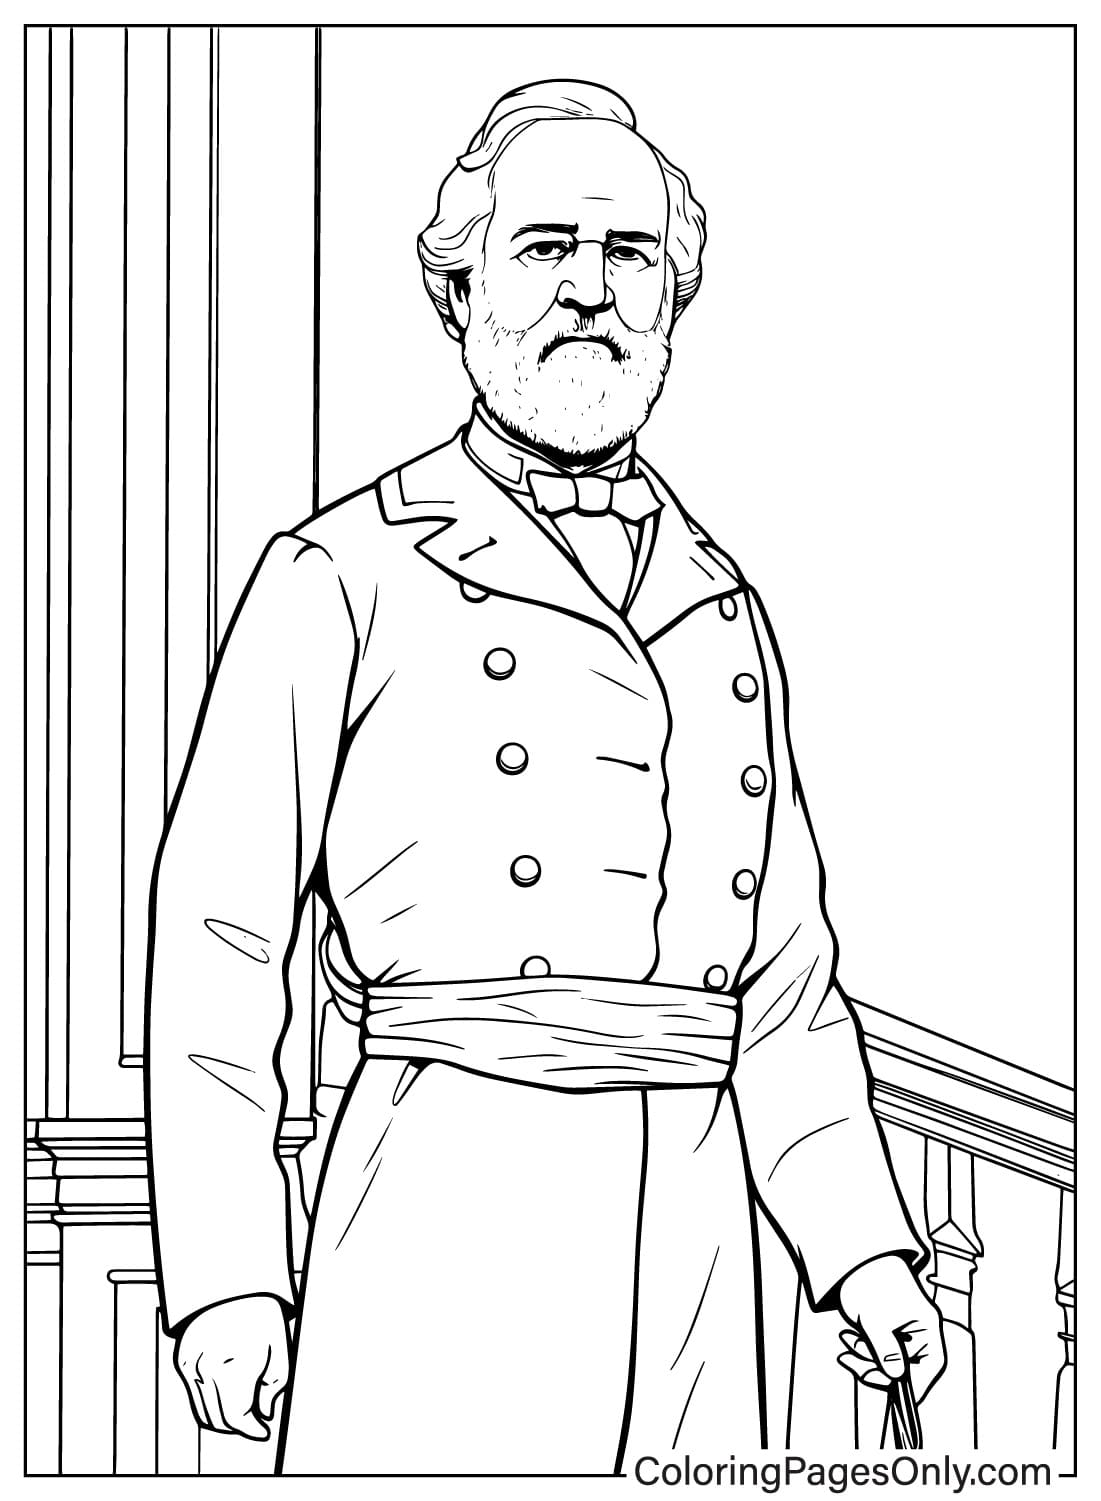 Coloring Page Robert E. Lee from Robert E. Lee